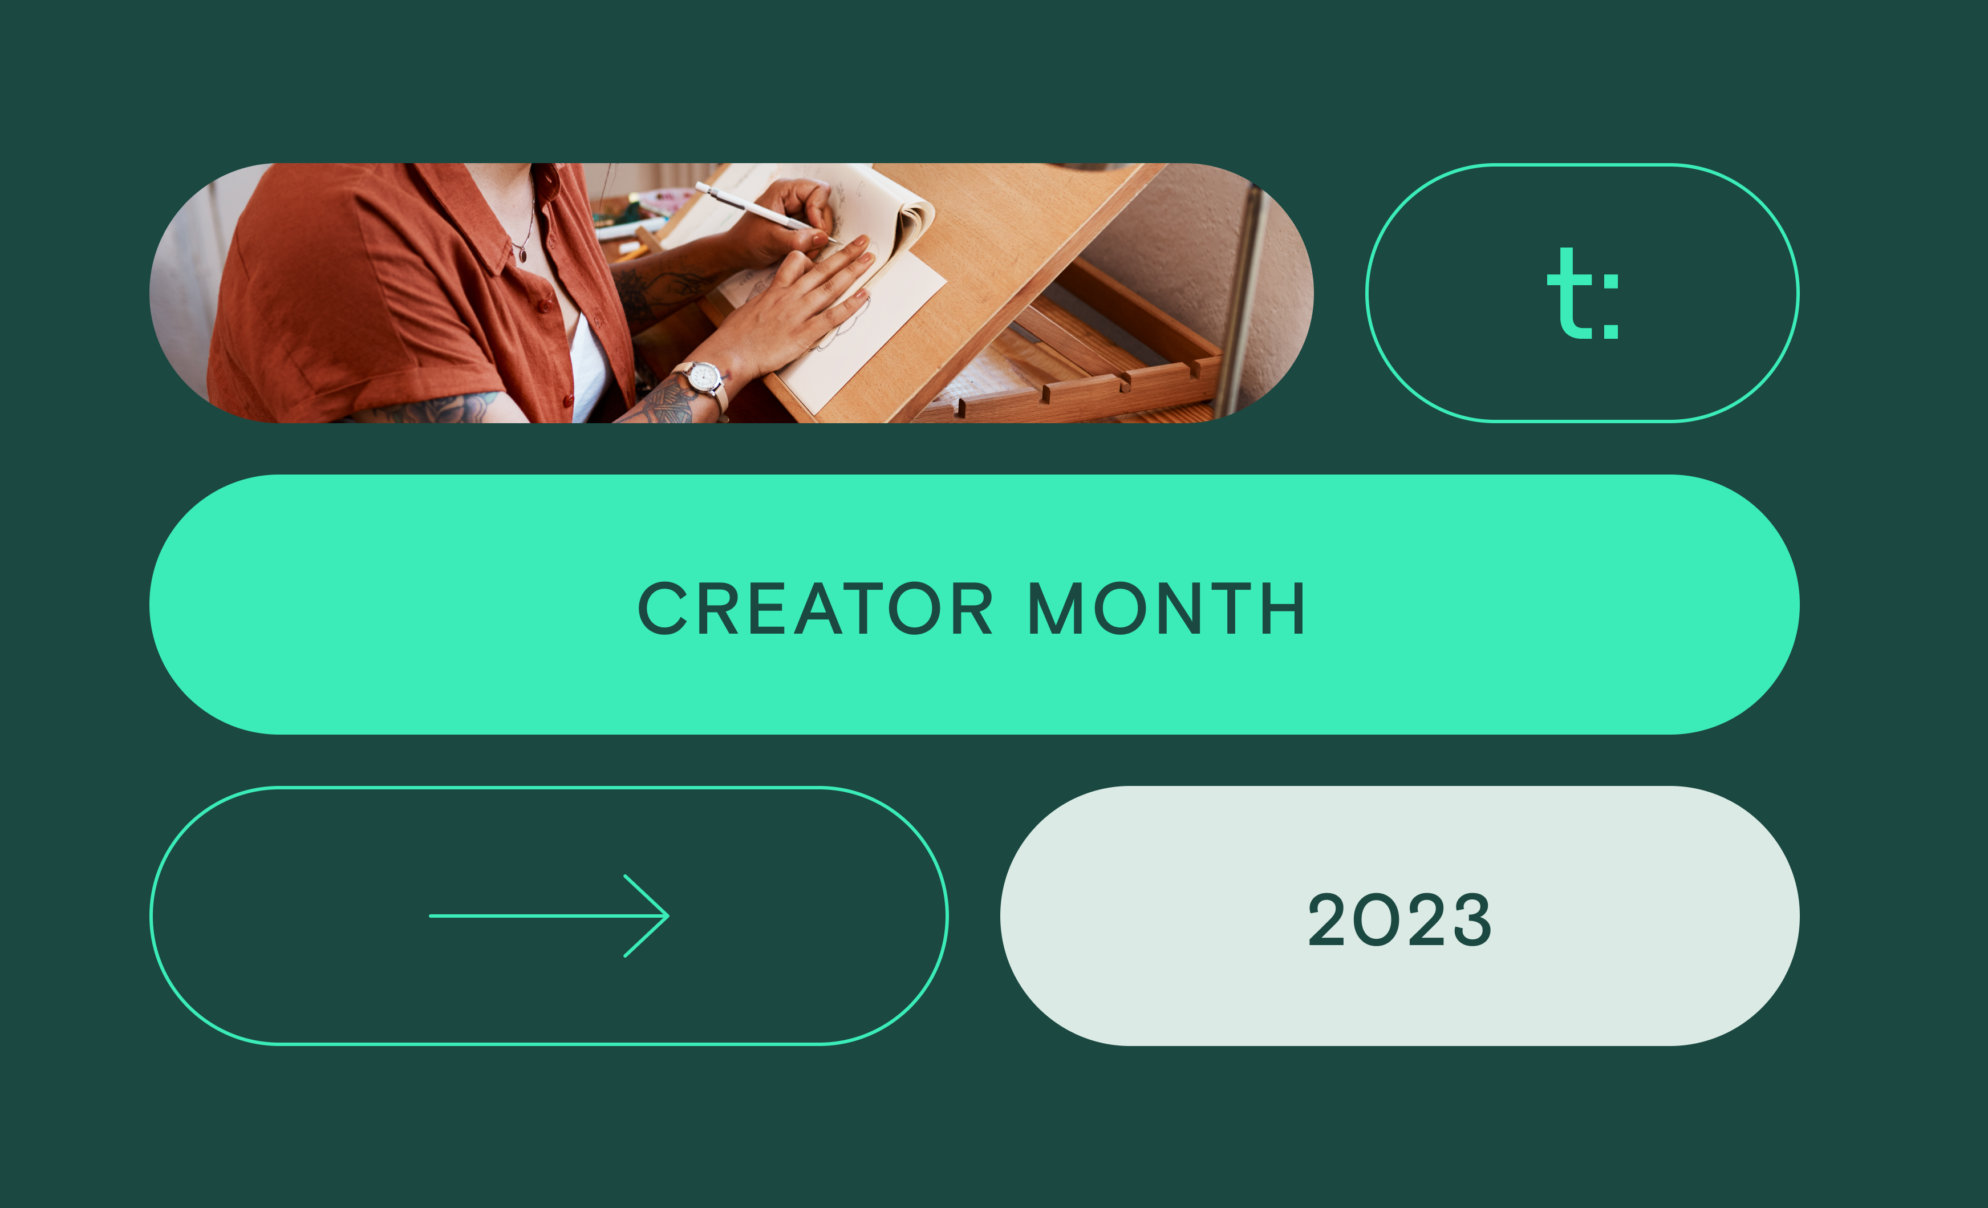 Teachable Creator Month 2023: Creating connection and impact